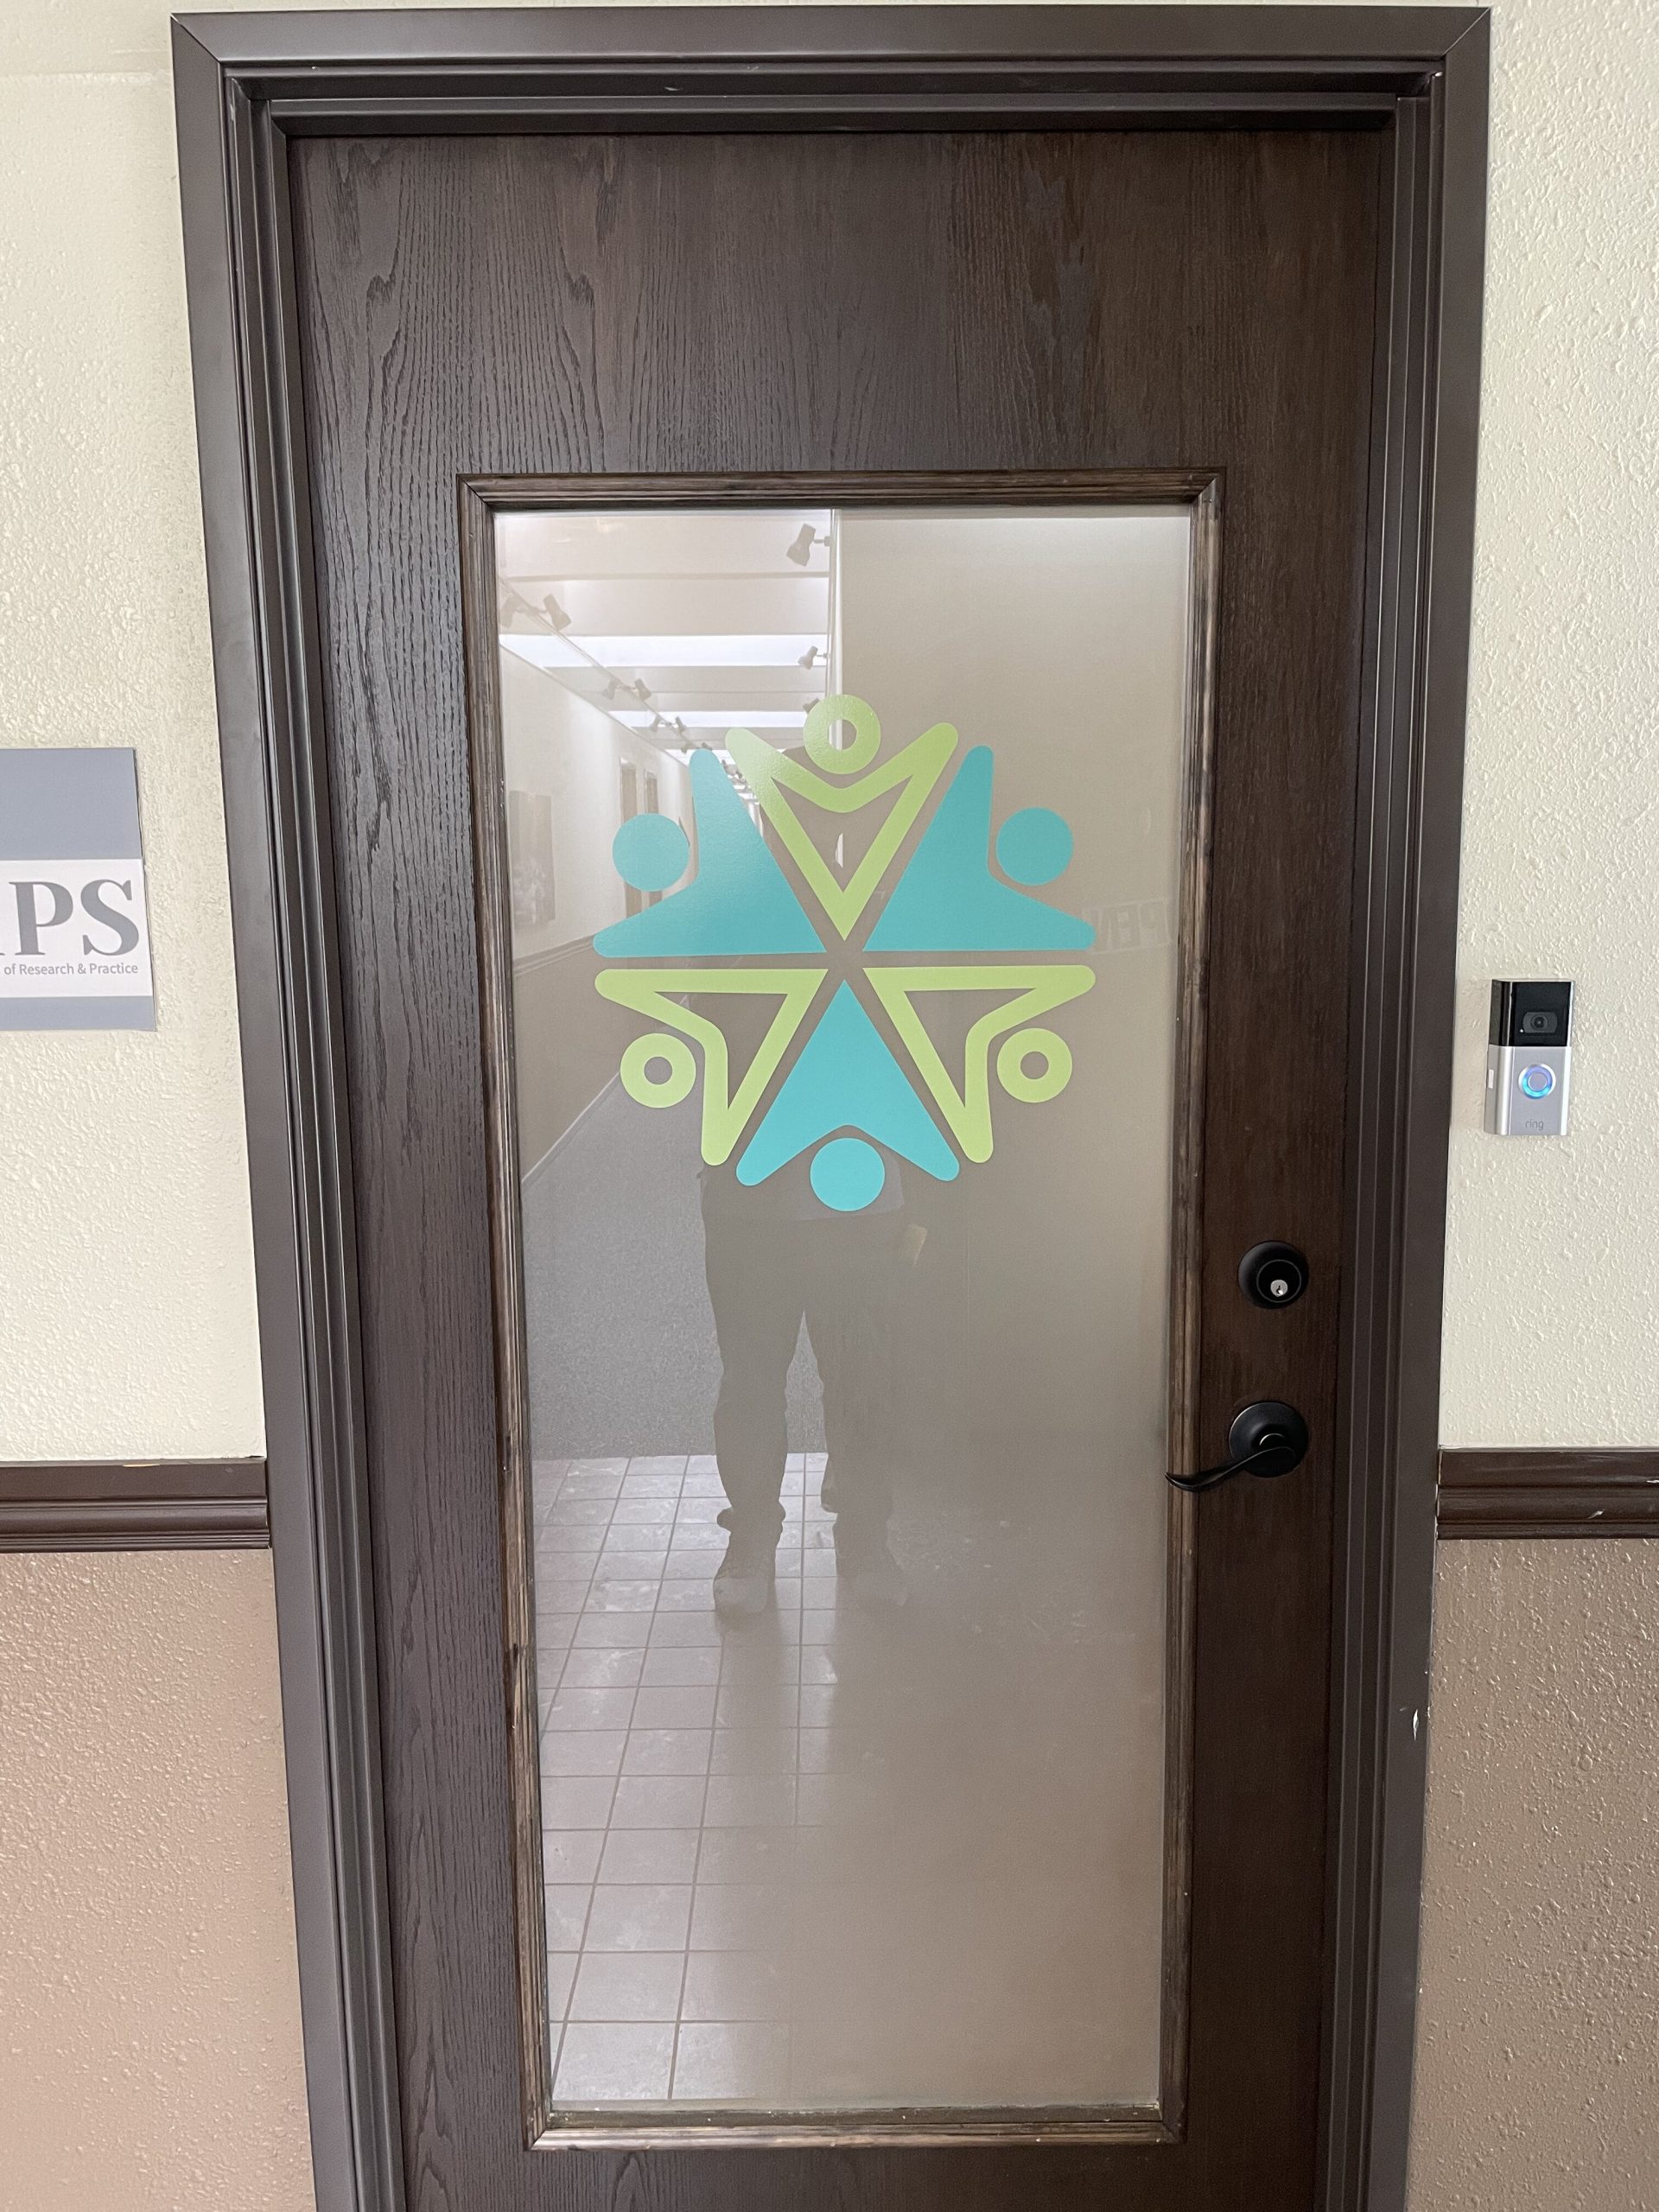 Give a new look to your office or home by amazing door signs